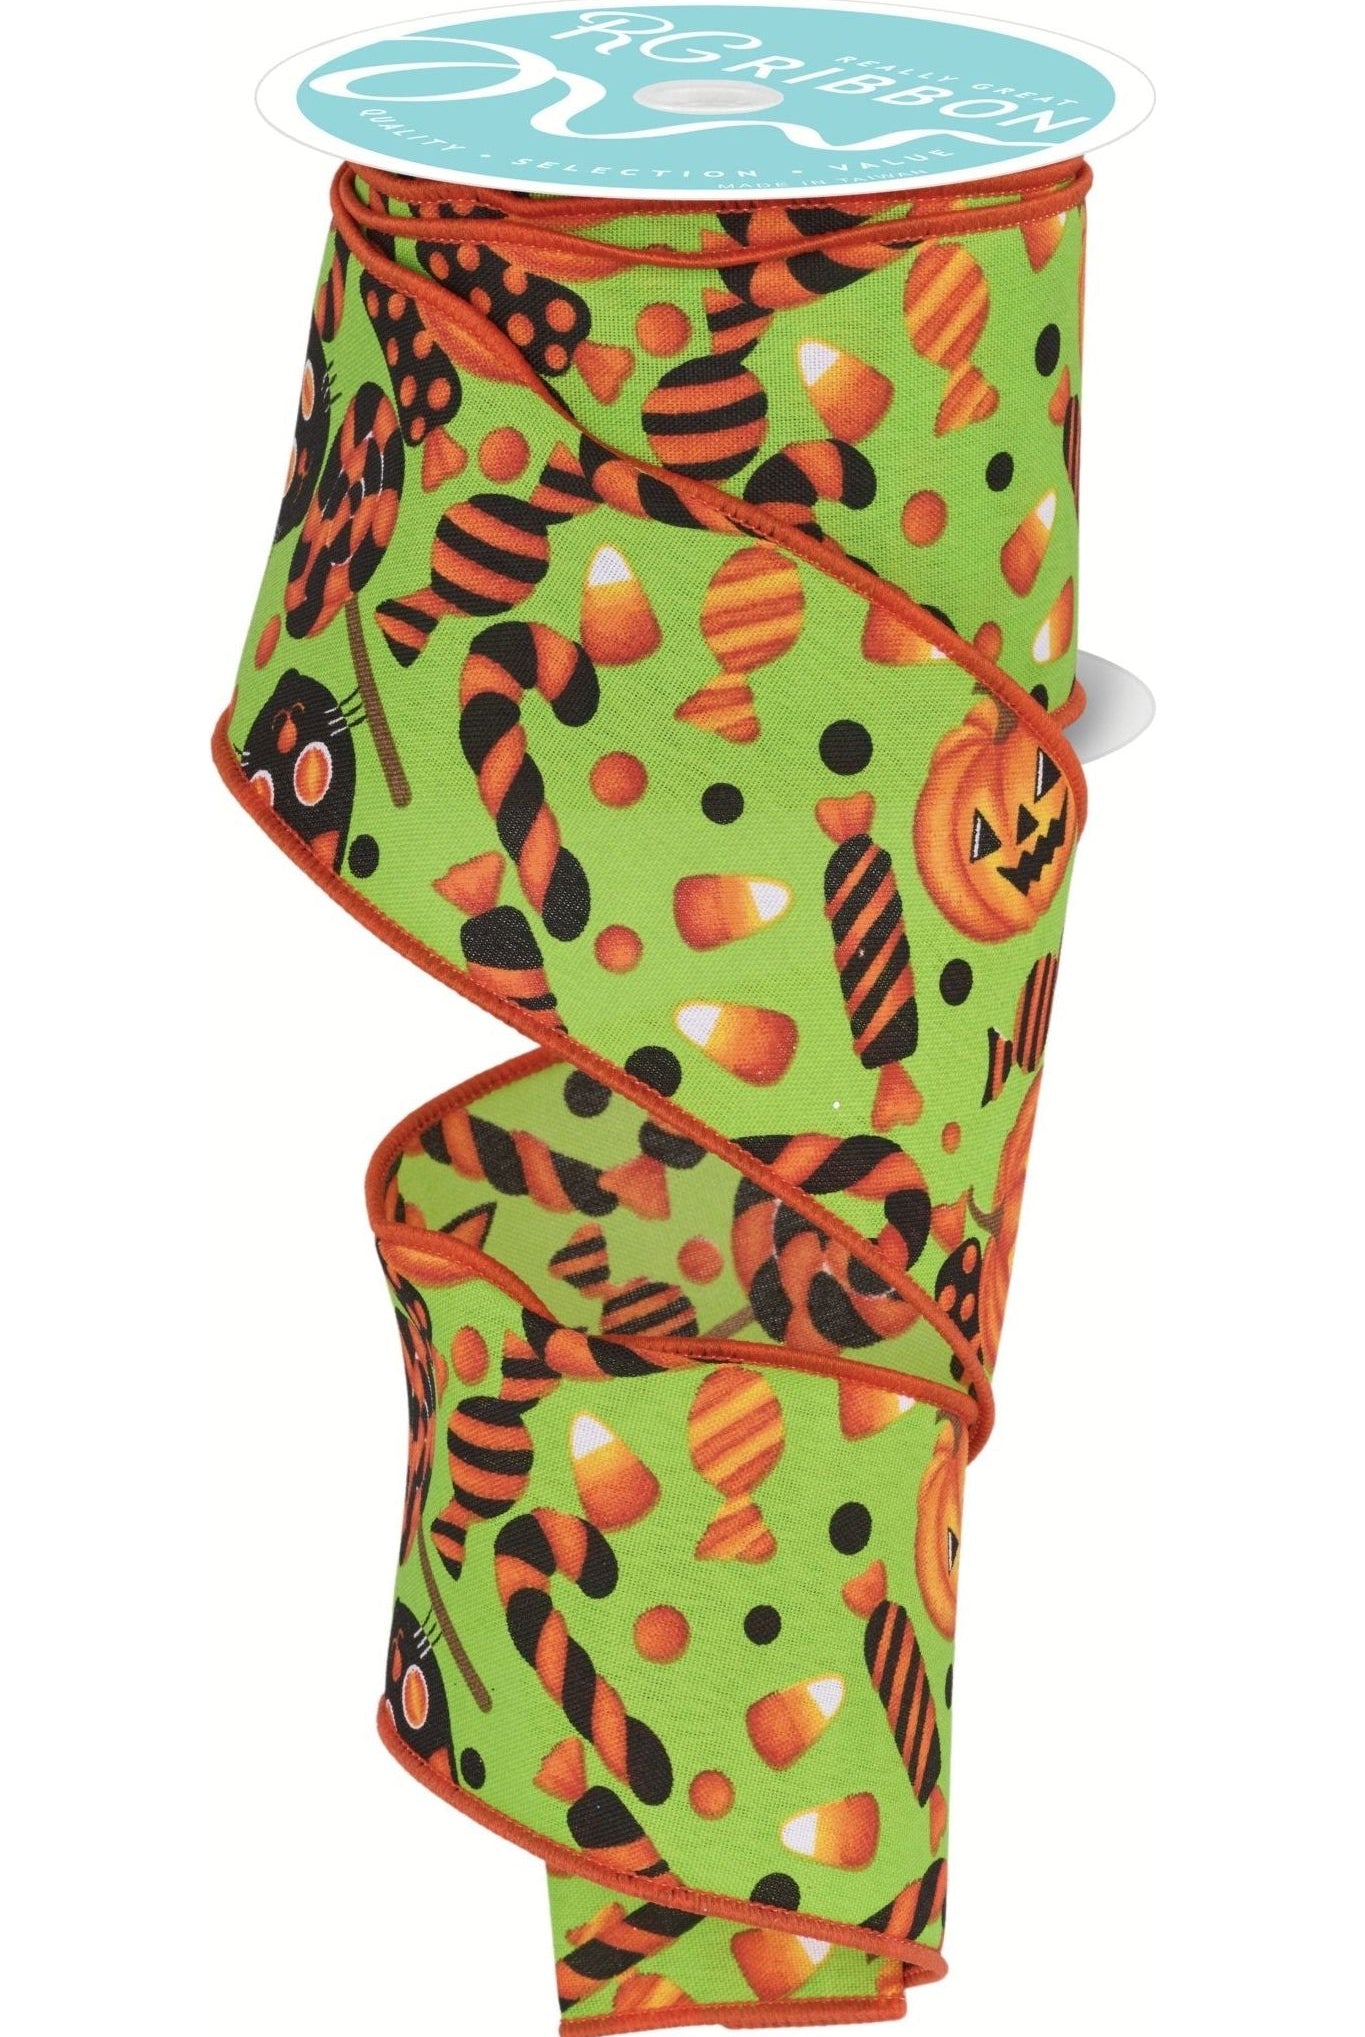 Shop For 2.5" Pumpkin Cat Candy Ribbon: Lime Green (10 Yards) RGF130933